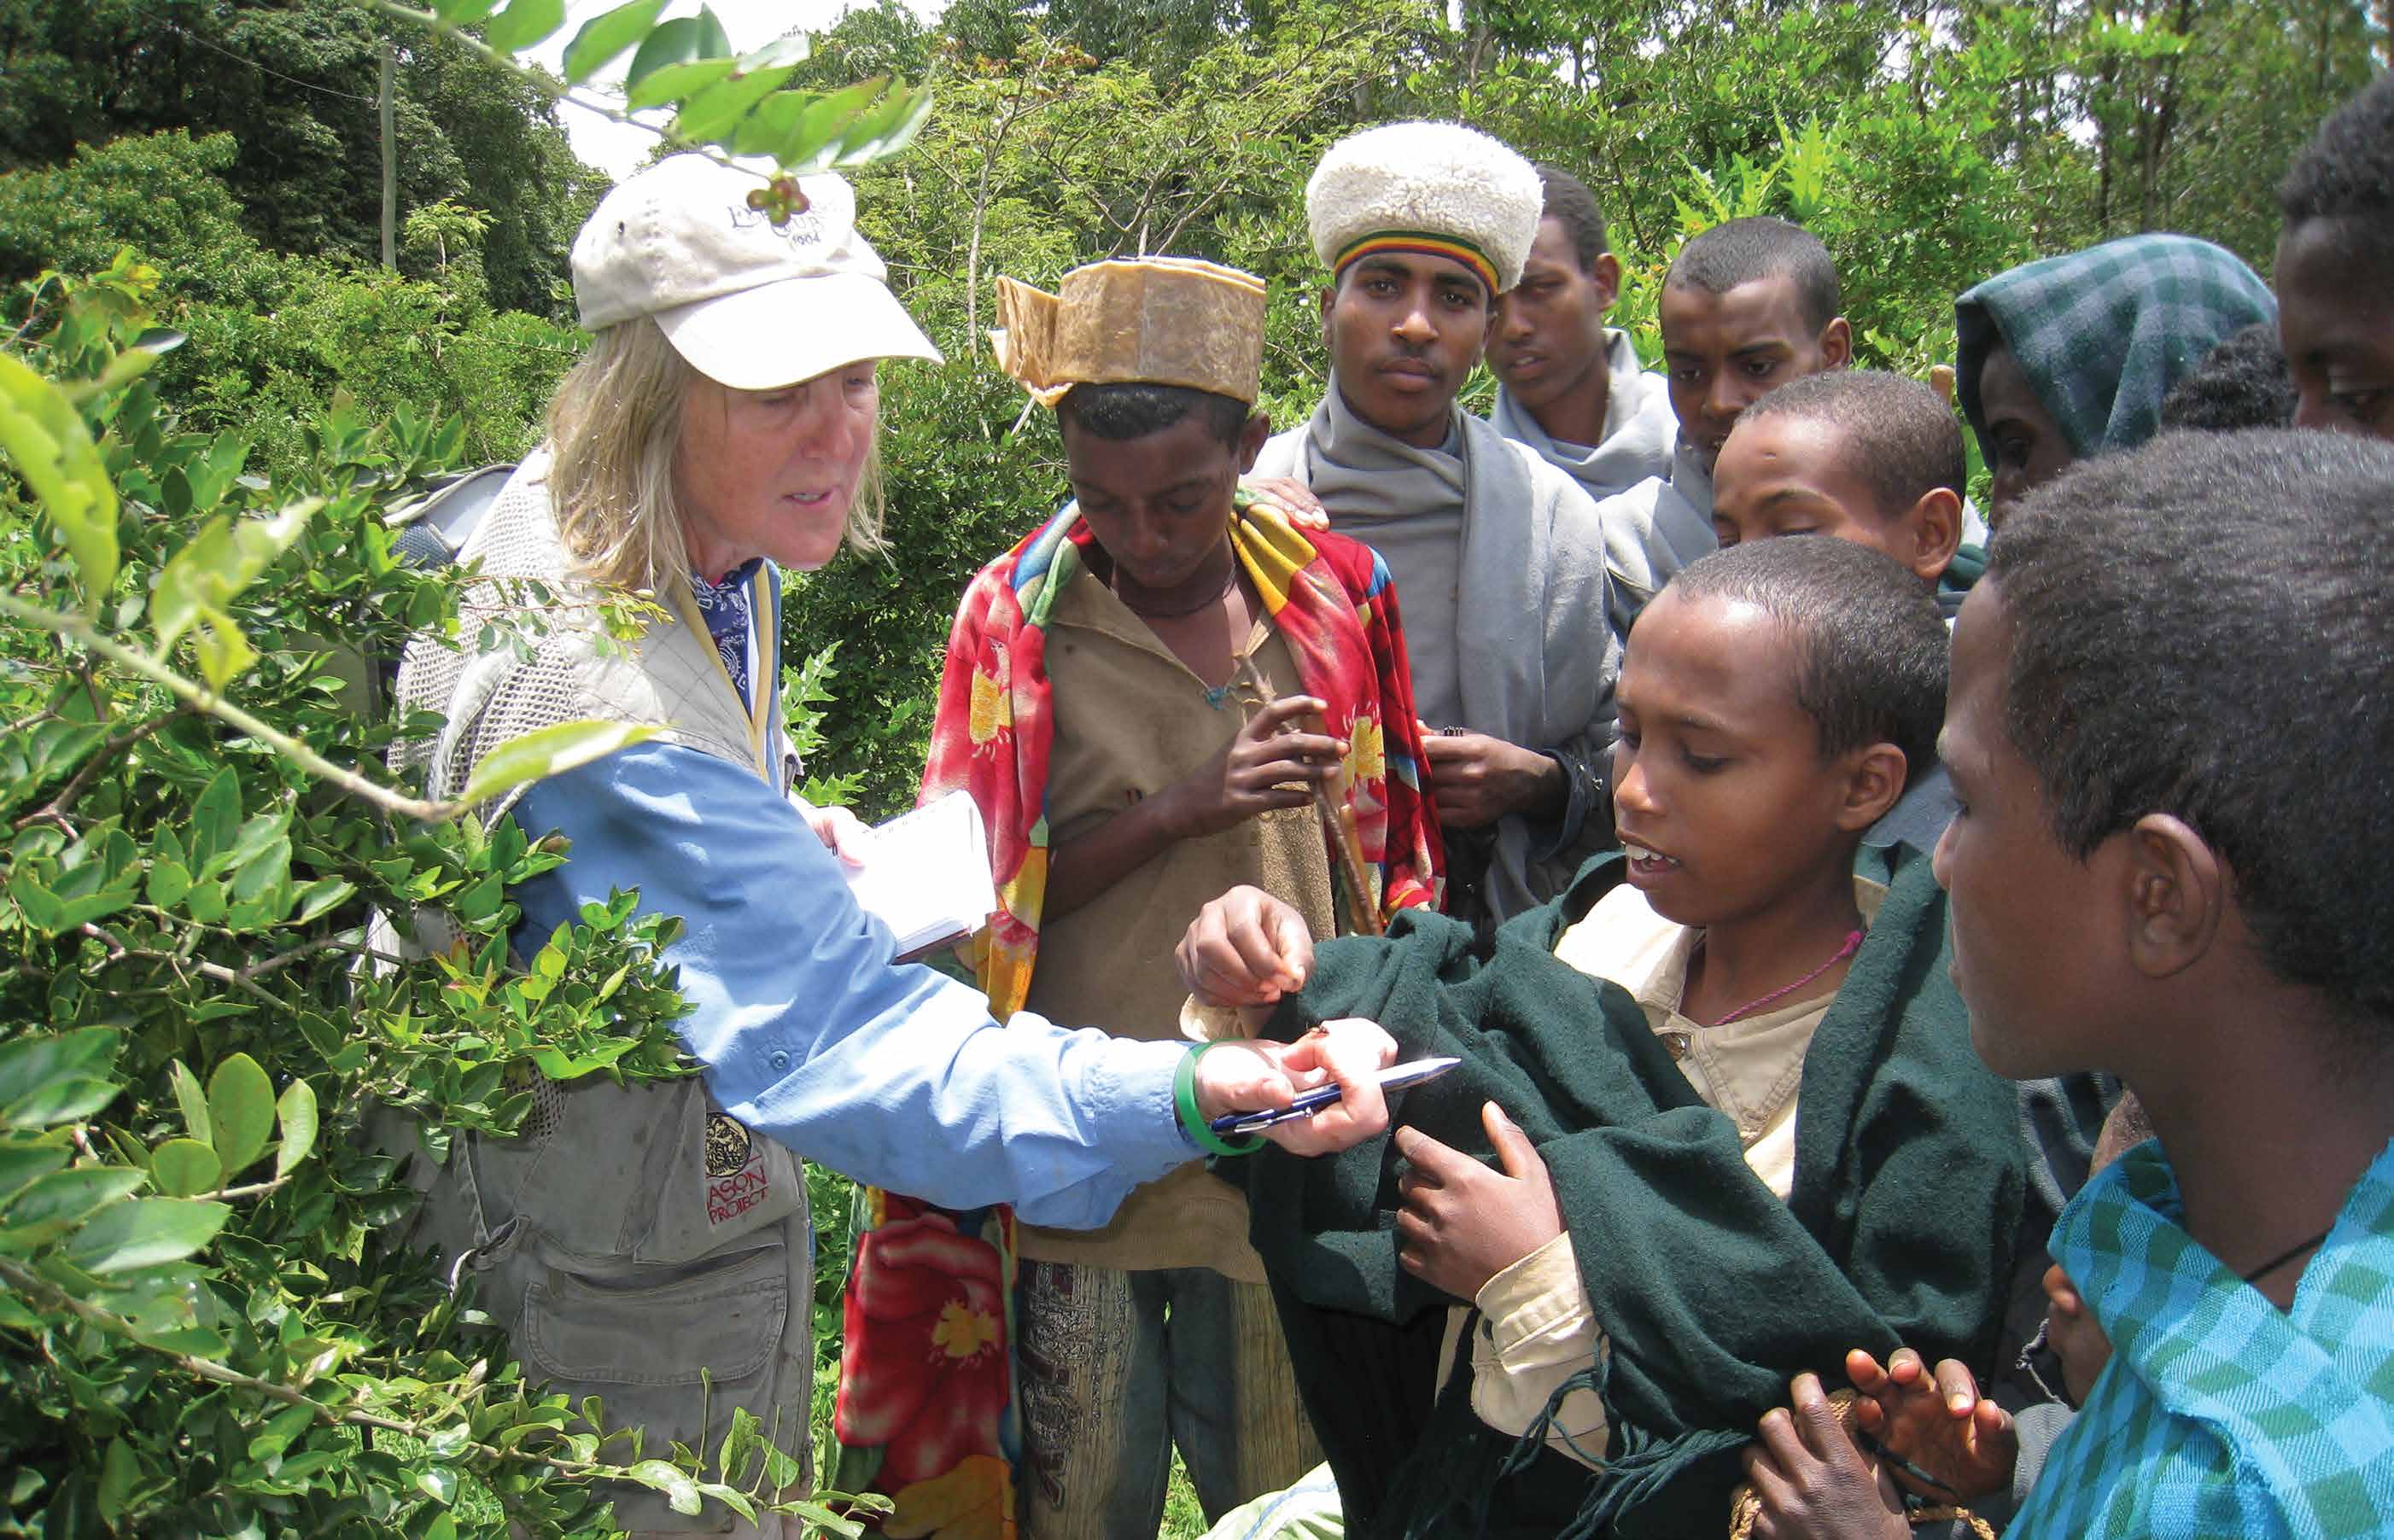 In Ethiopia, Meg works with churches and communities to conserve forests.